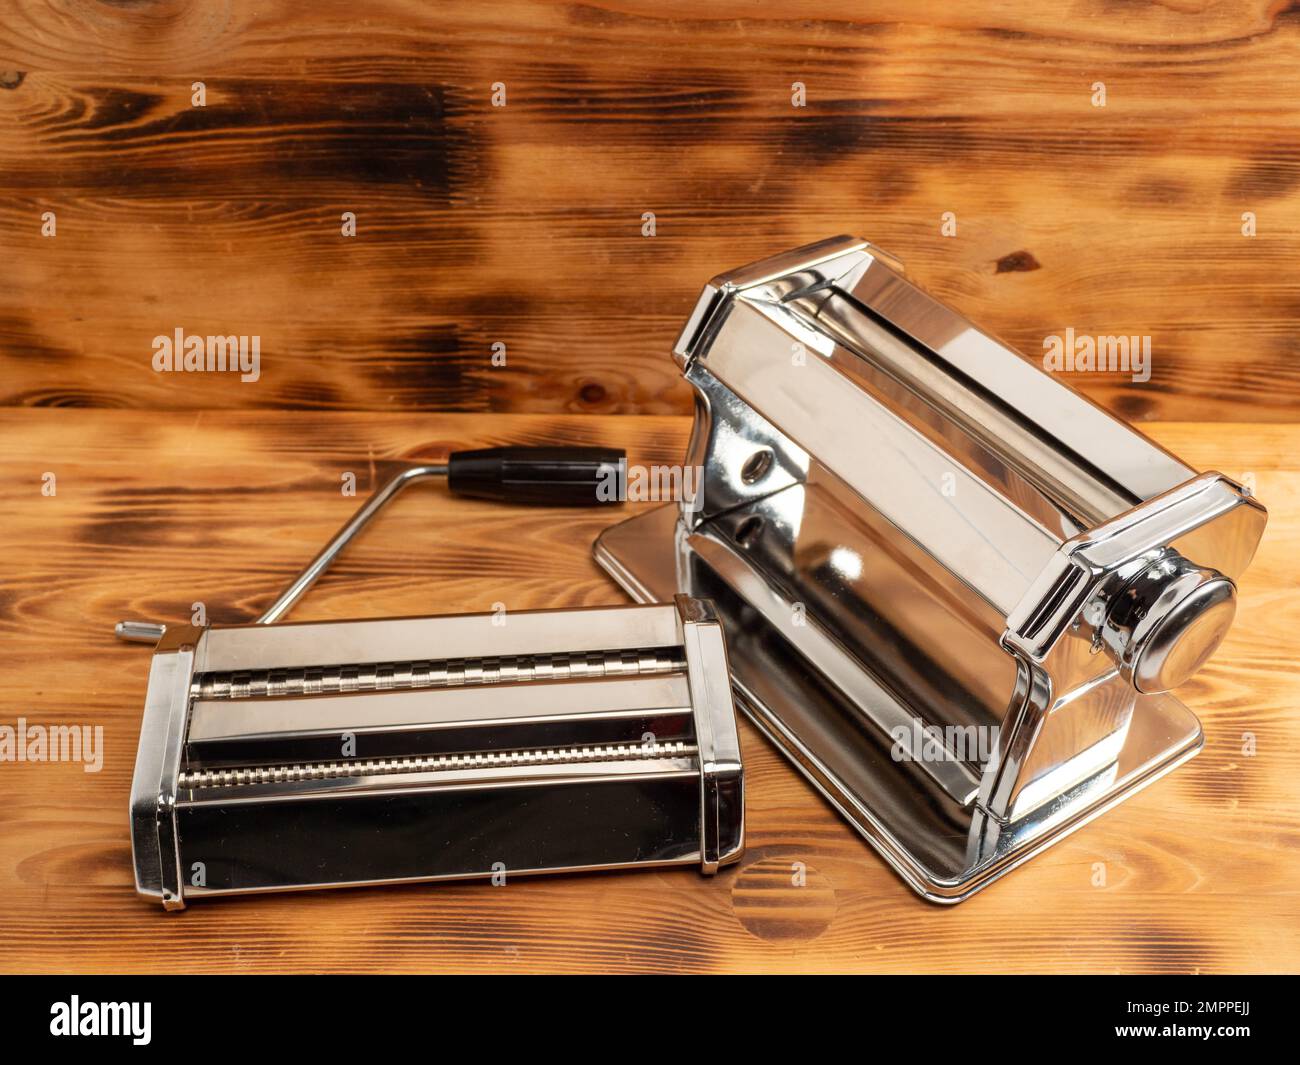 https://c8.alamy.com/comp/2MPPEJJ/manual-machine-for-rolling-dough-and-pasta-noodle-cutter-chrome-plated-steel-anodized-aluminium-wooden-background-2MPPEJJ.jpg